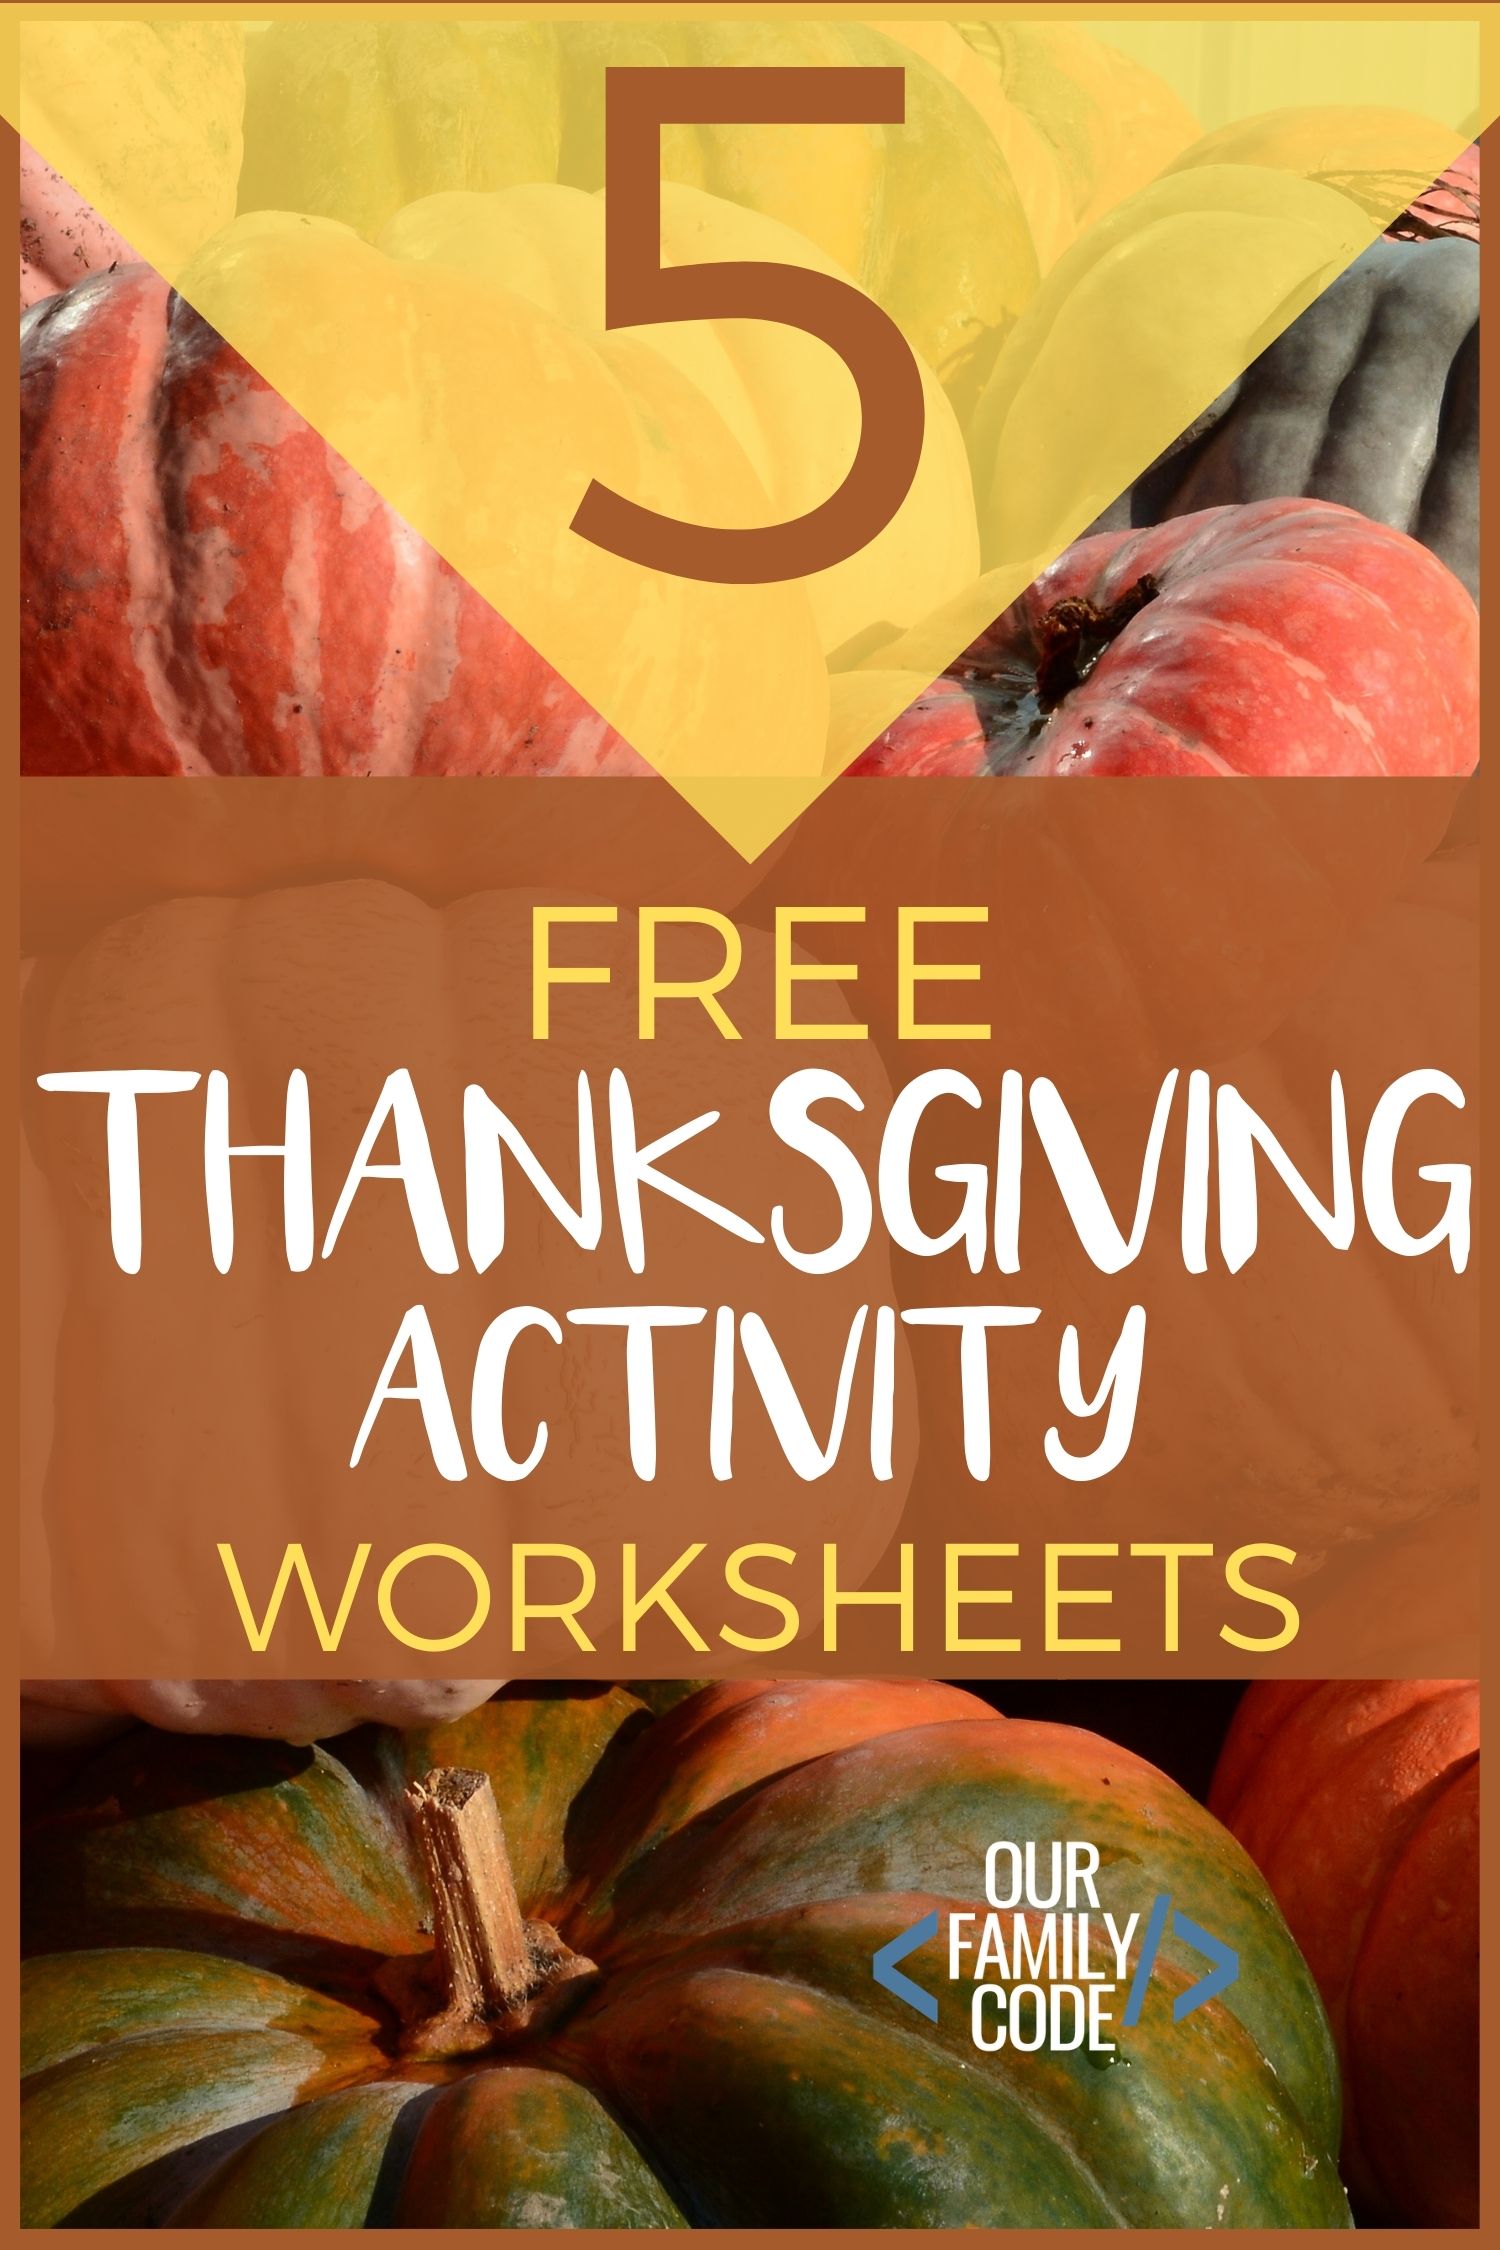 Free Thanksgiving Activity Worksheets for Kids 2 Check out these Free Thanksgiving Activity Worksheets, including I-Spy, Word Search, Number Recognition, Toddler Coloring Pages, Letter Recognition, and Less Than or Greater Than Thanksgiving Dinner Math!